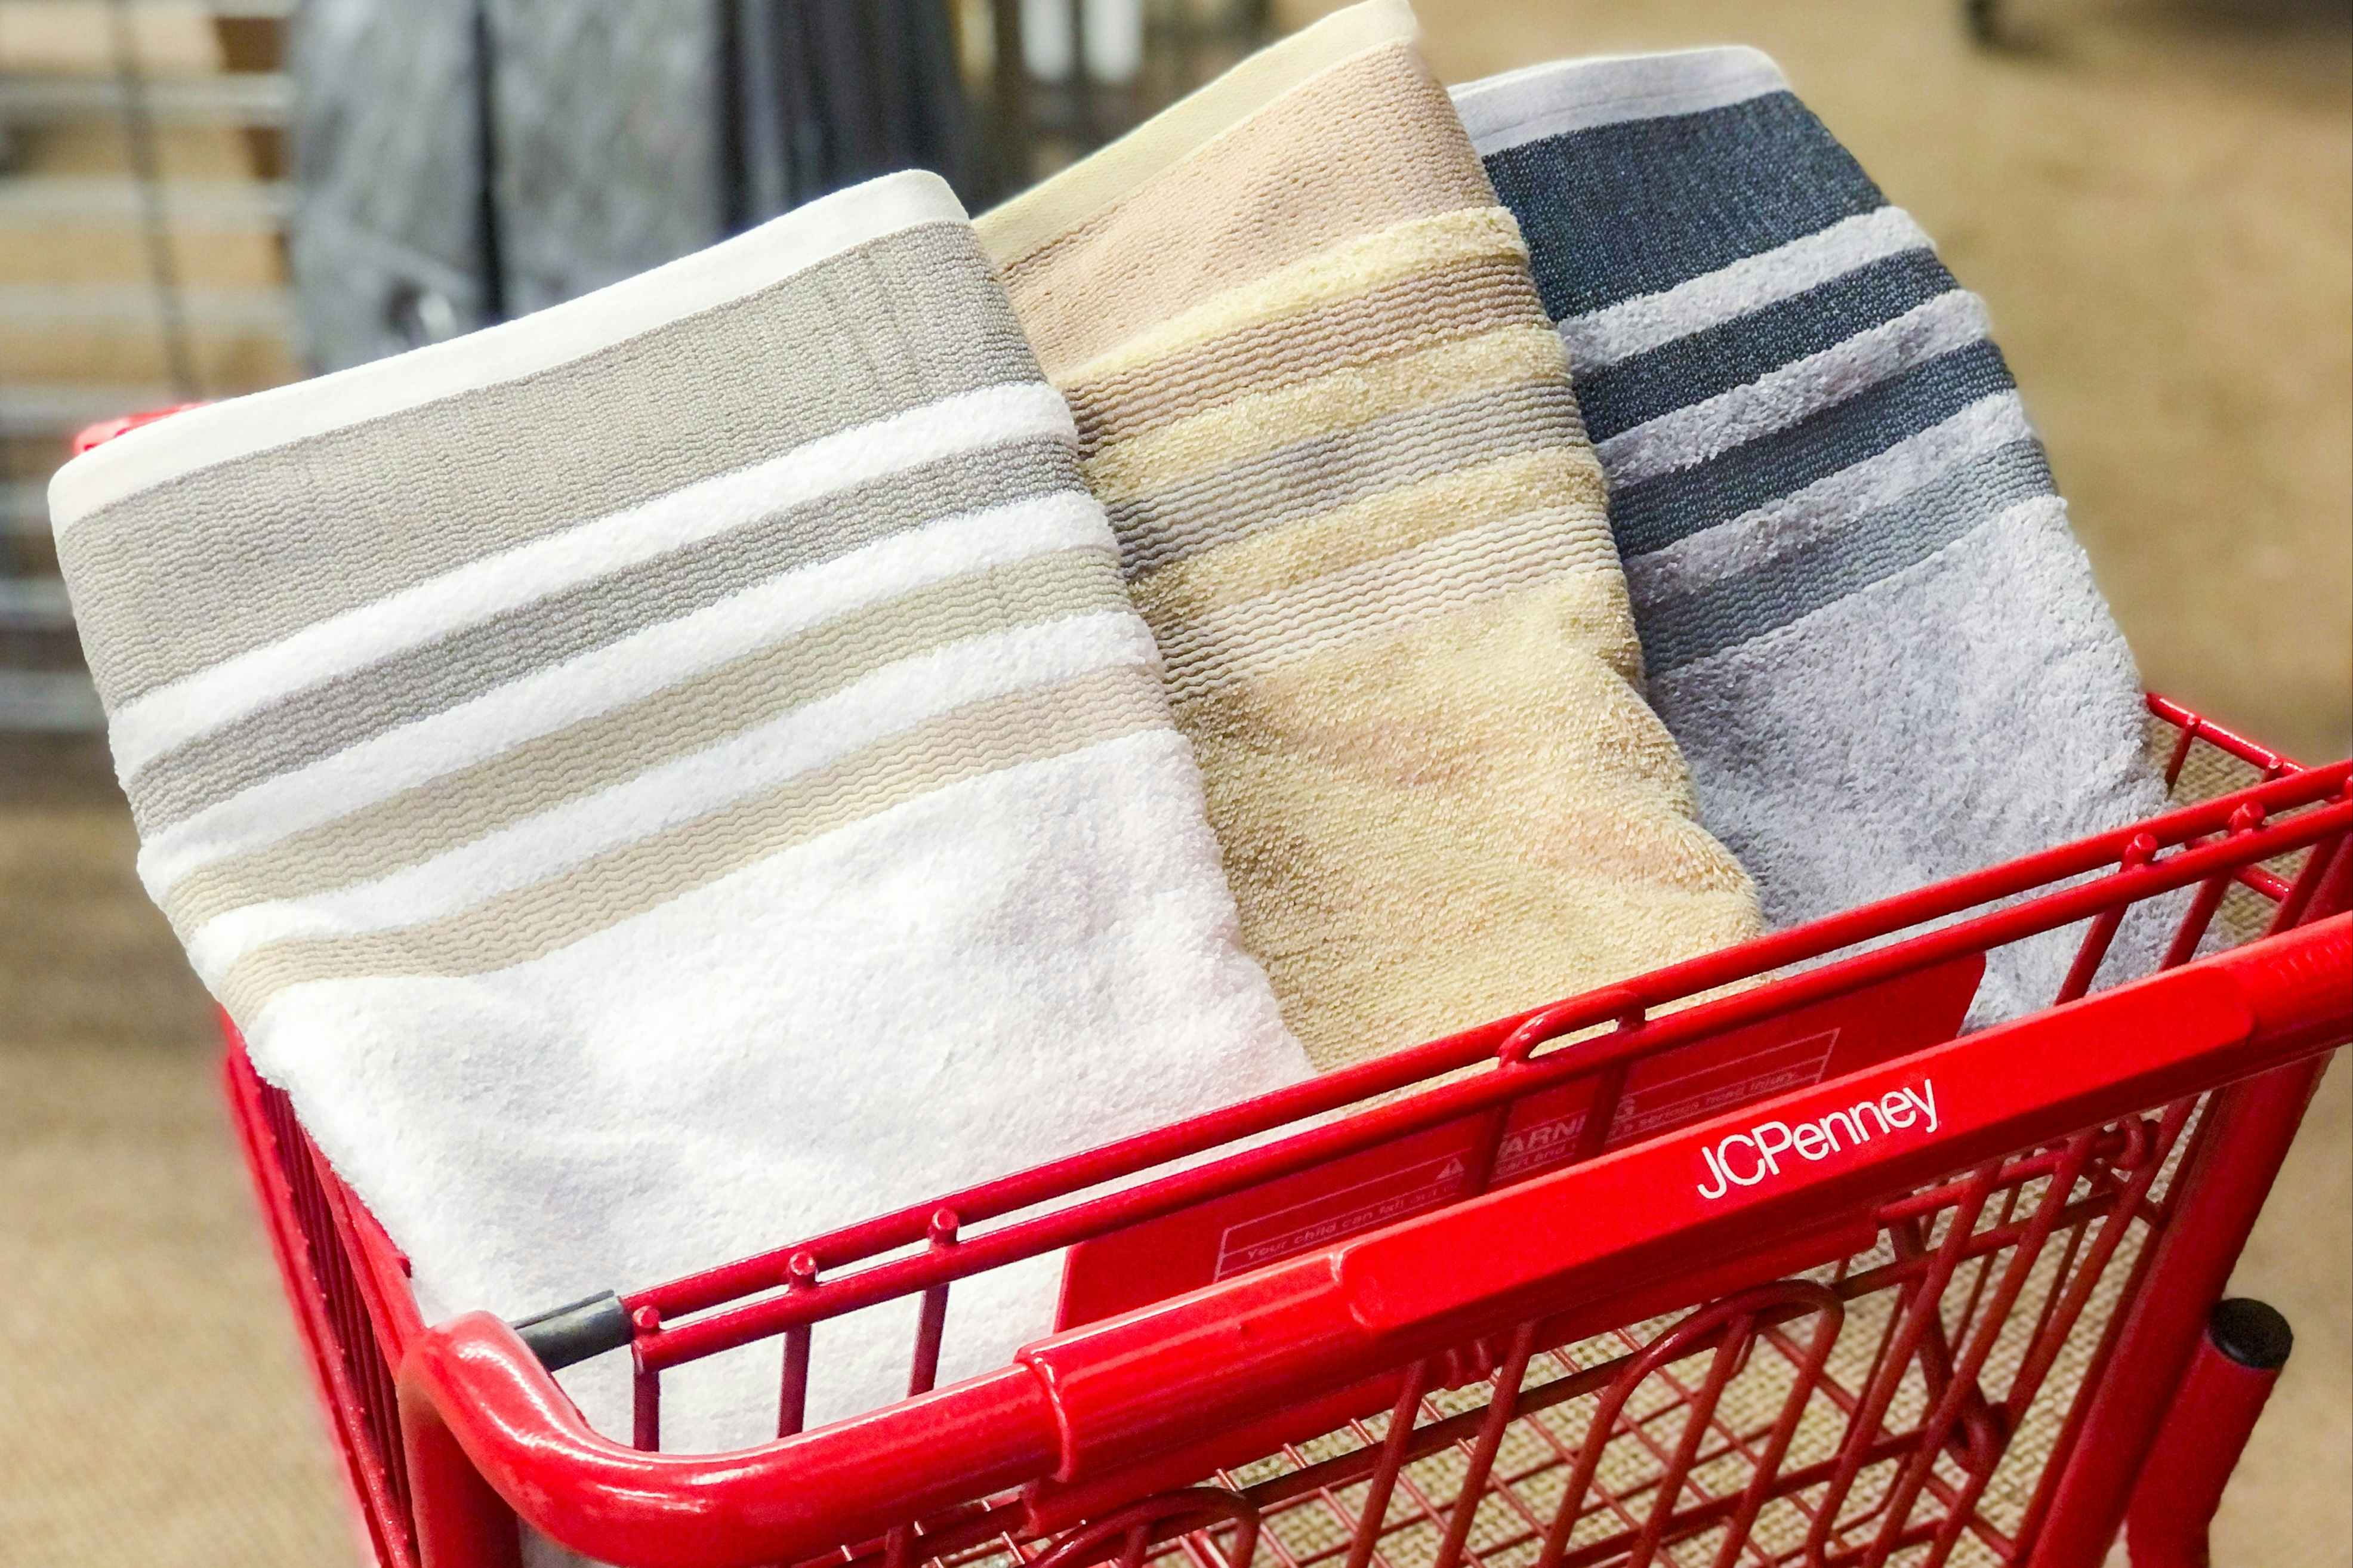 Score These Popular Bath Towels at JCPenney for Only $3.49